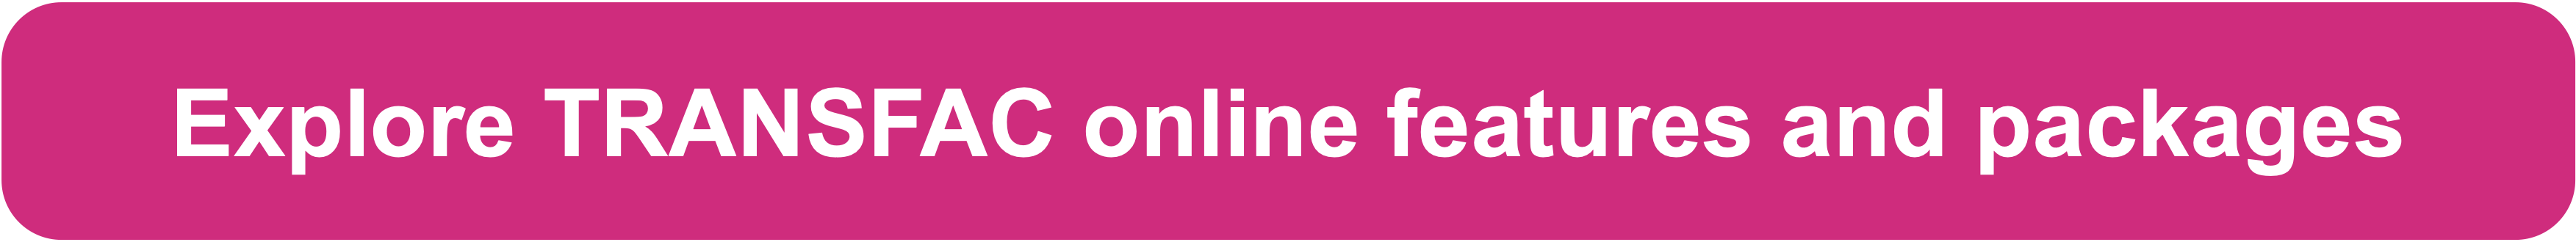 Explore TRANSFAC online features and packages info